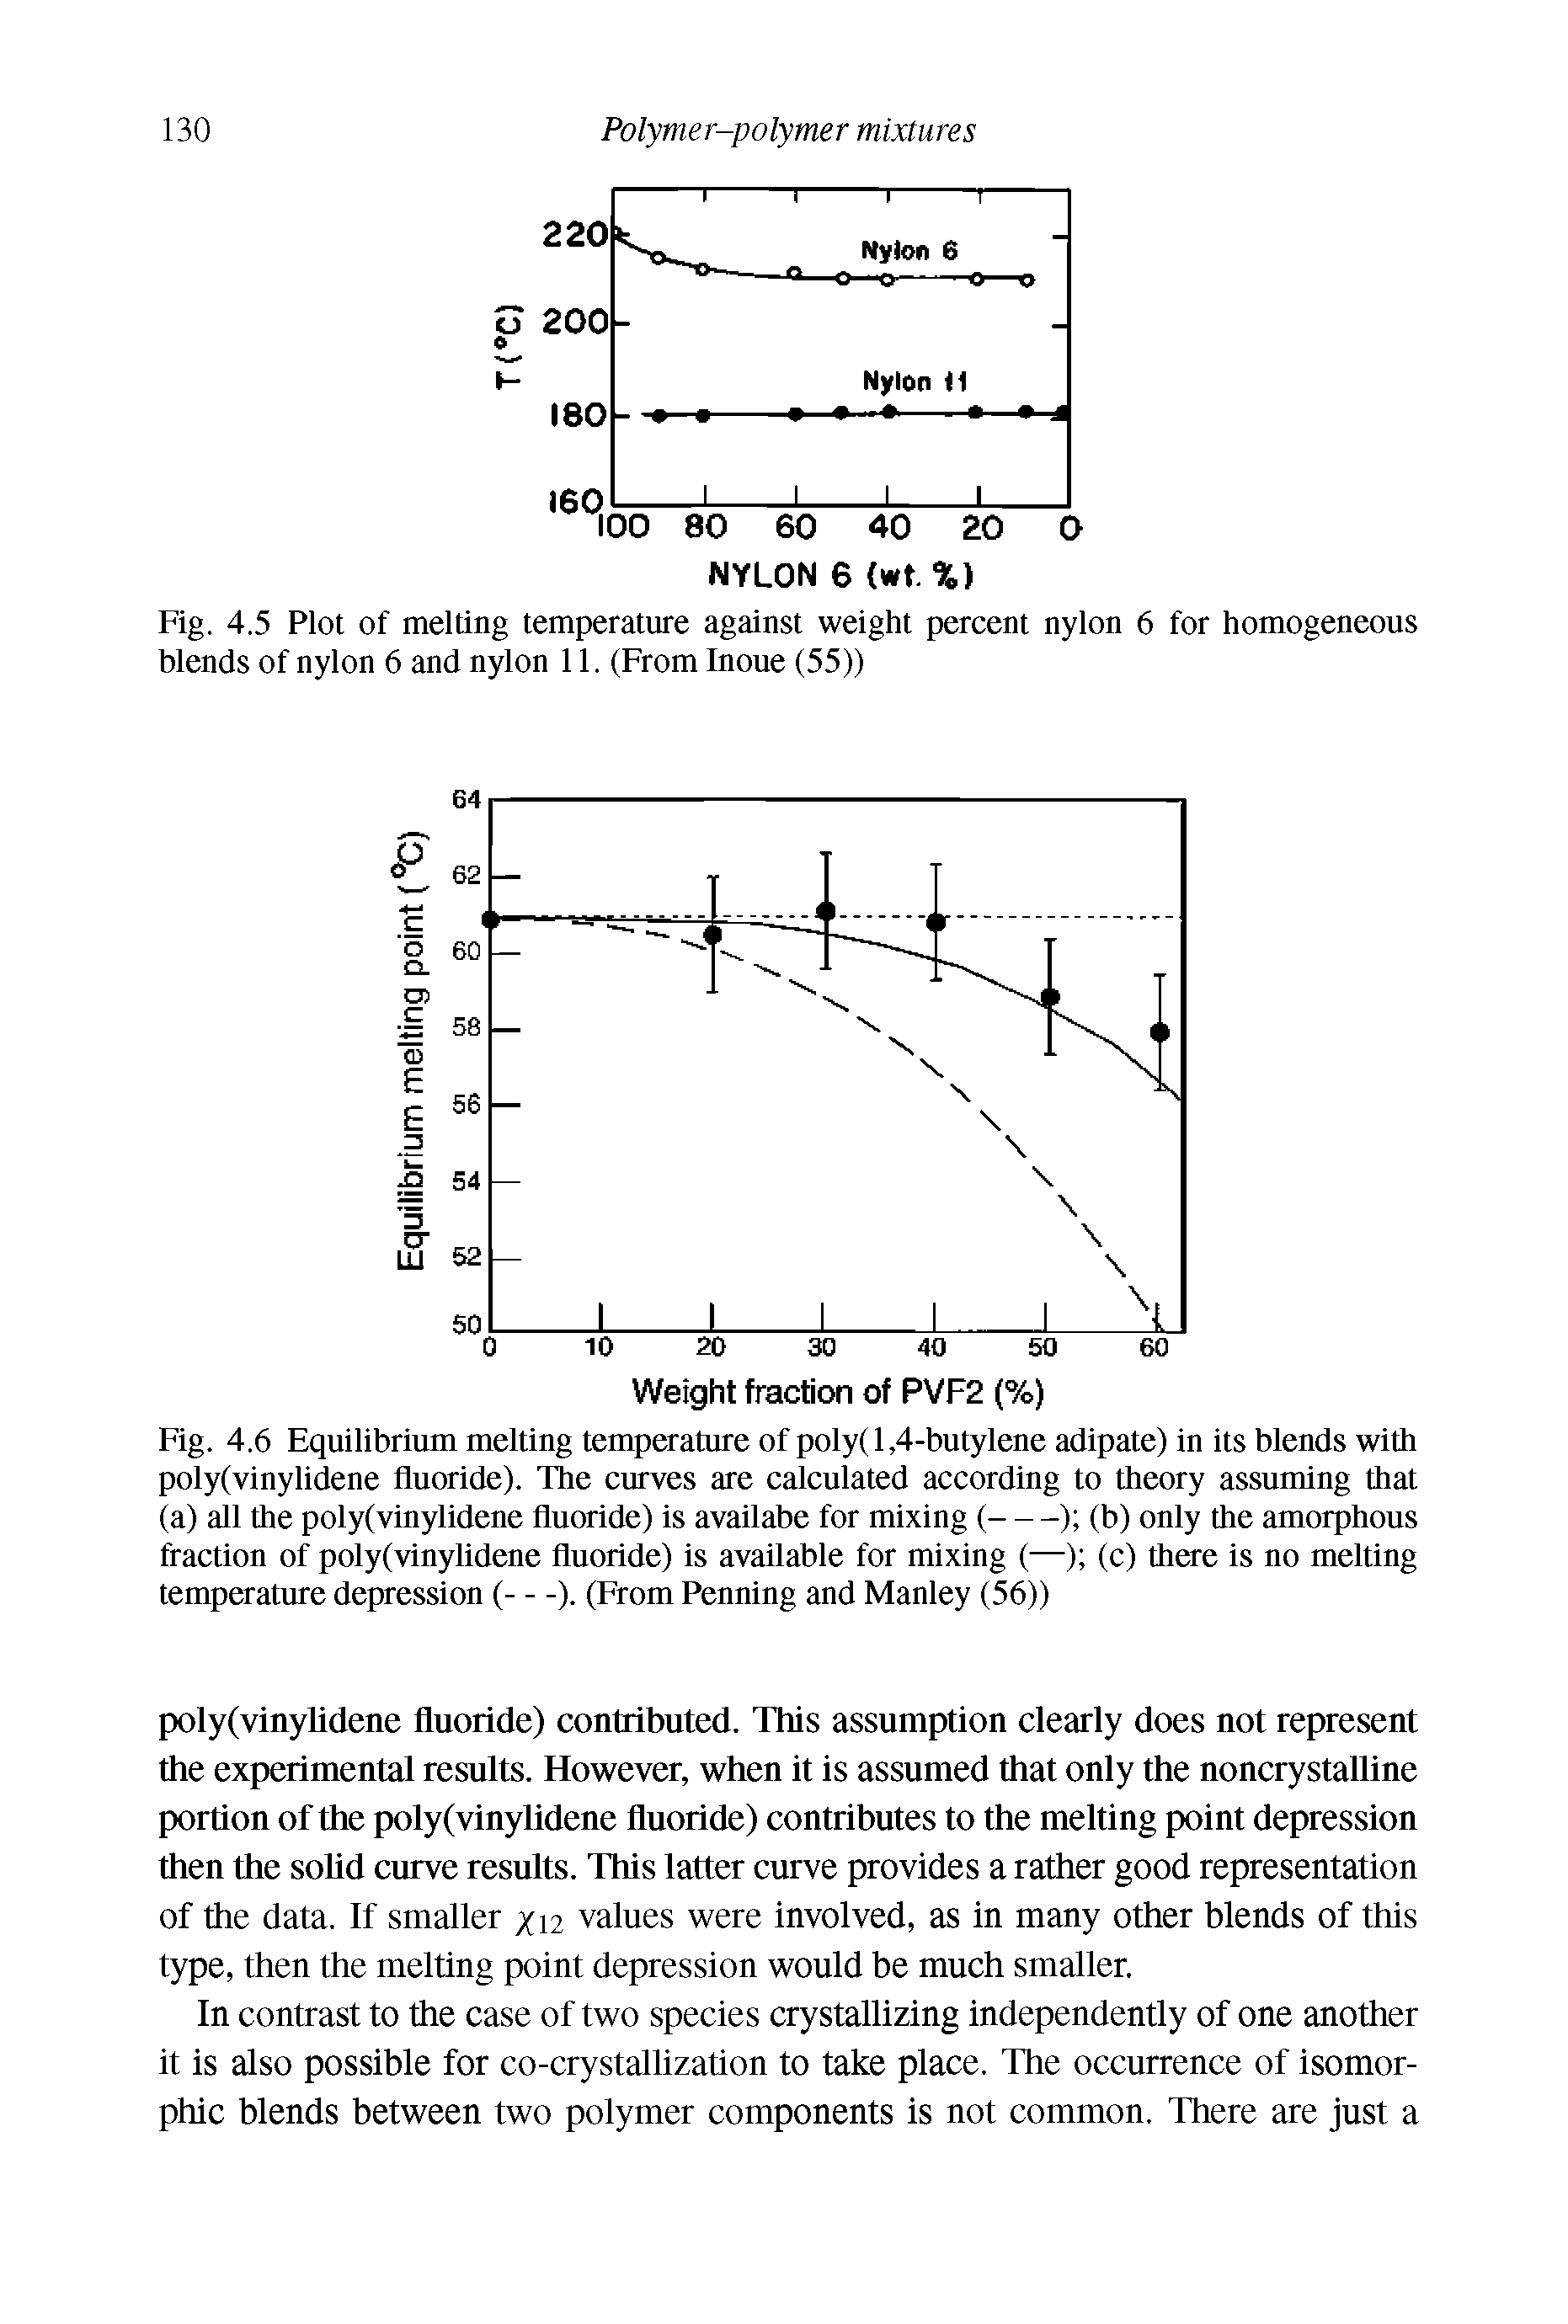 Fig. 4.6 Equilibrium melting temperature of poly( 1,4-butylene adipate) in its blends with poly(vinylidene fluoride). The curves are calculated according to theory assuming that...